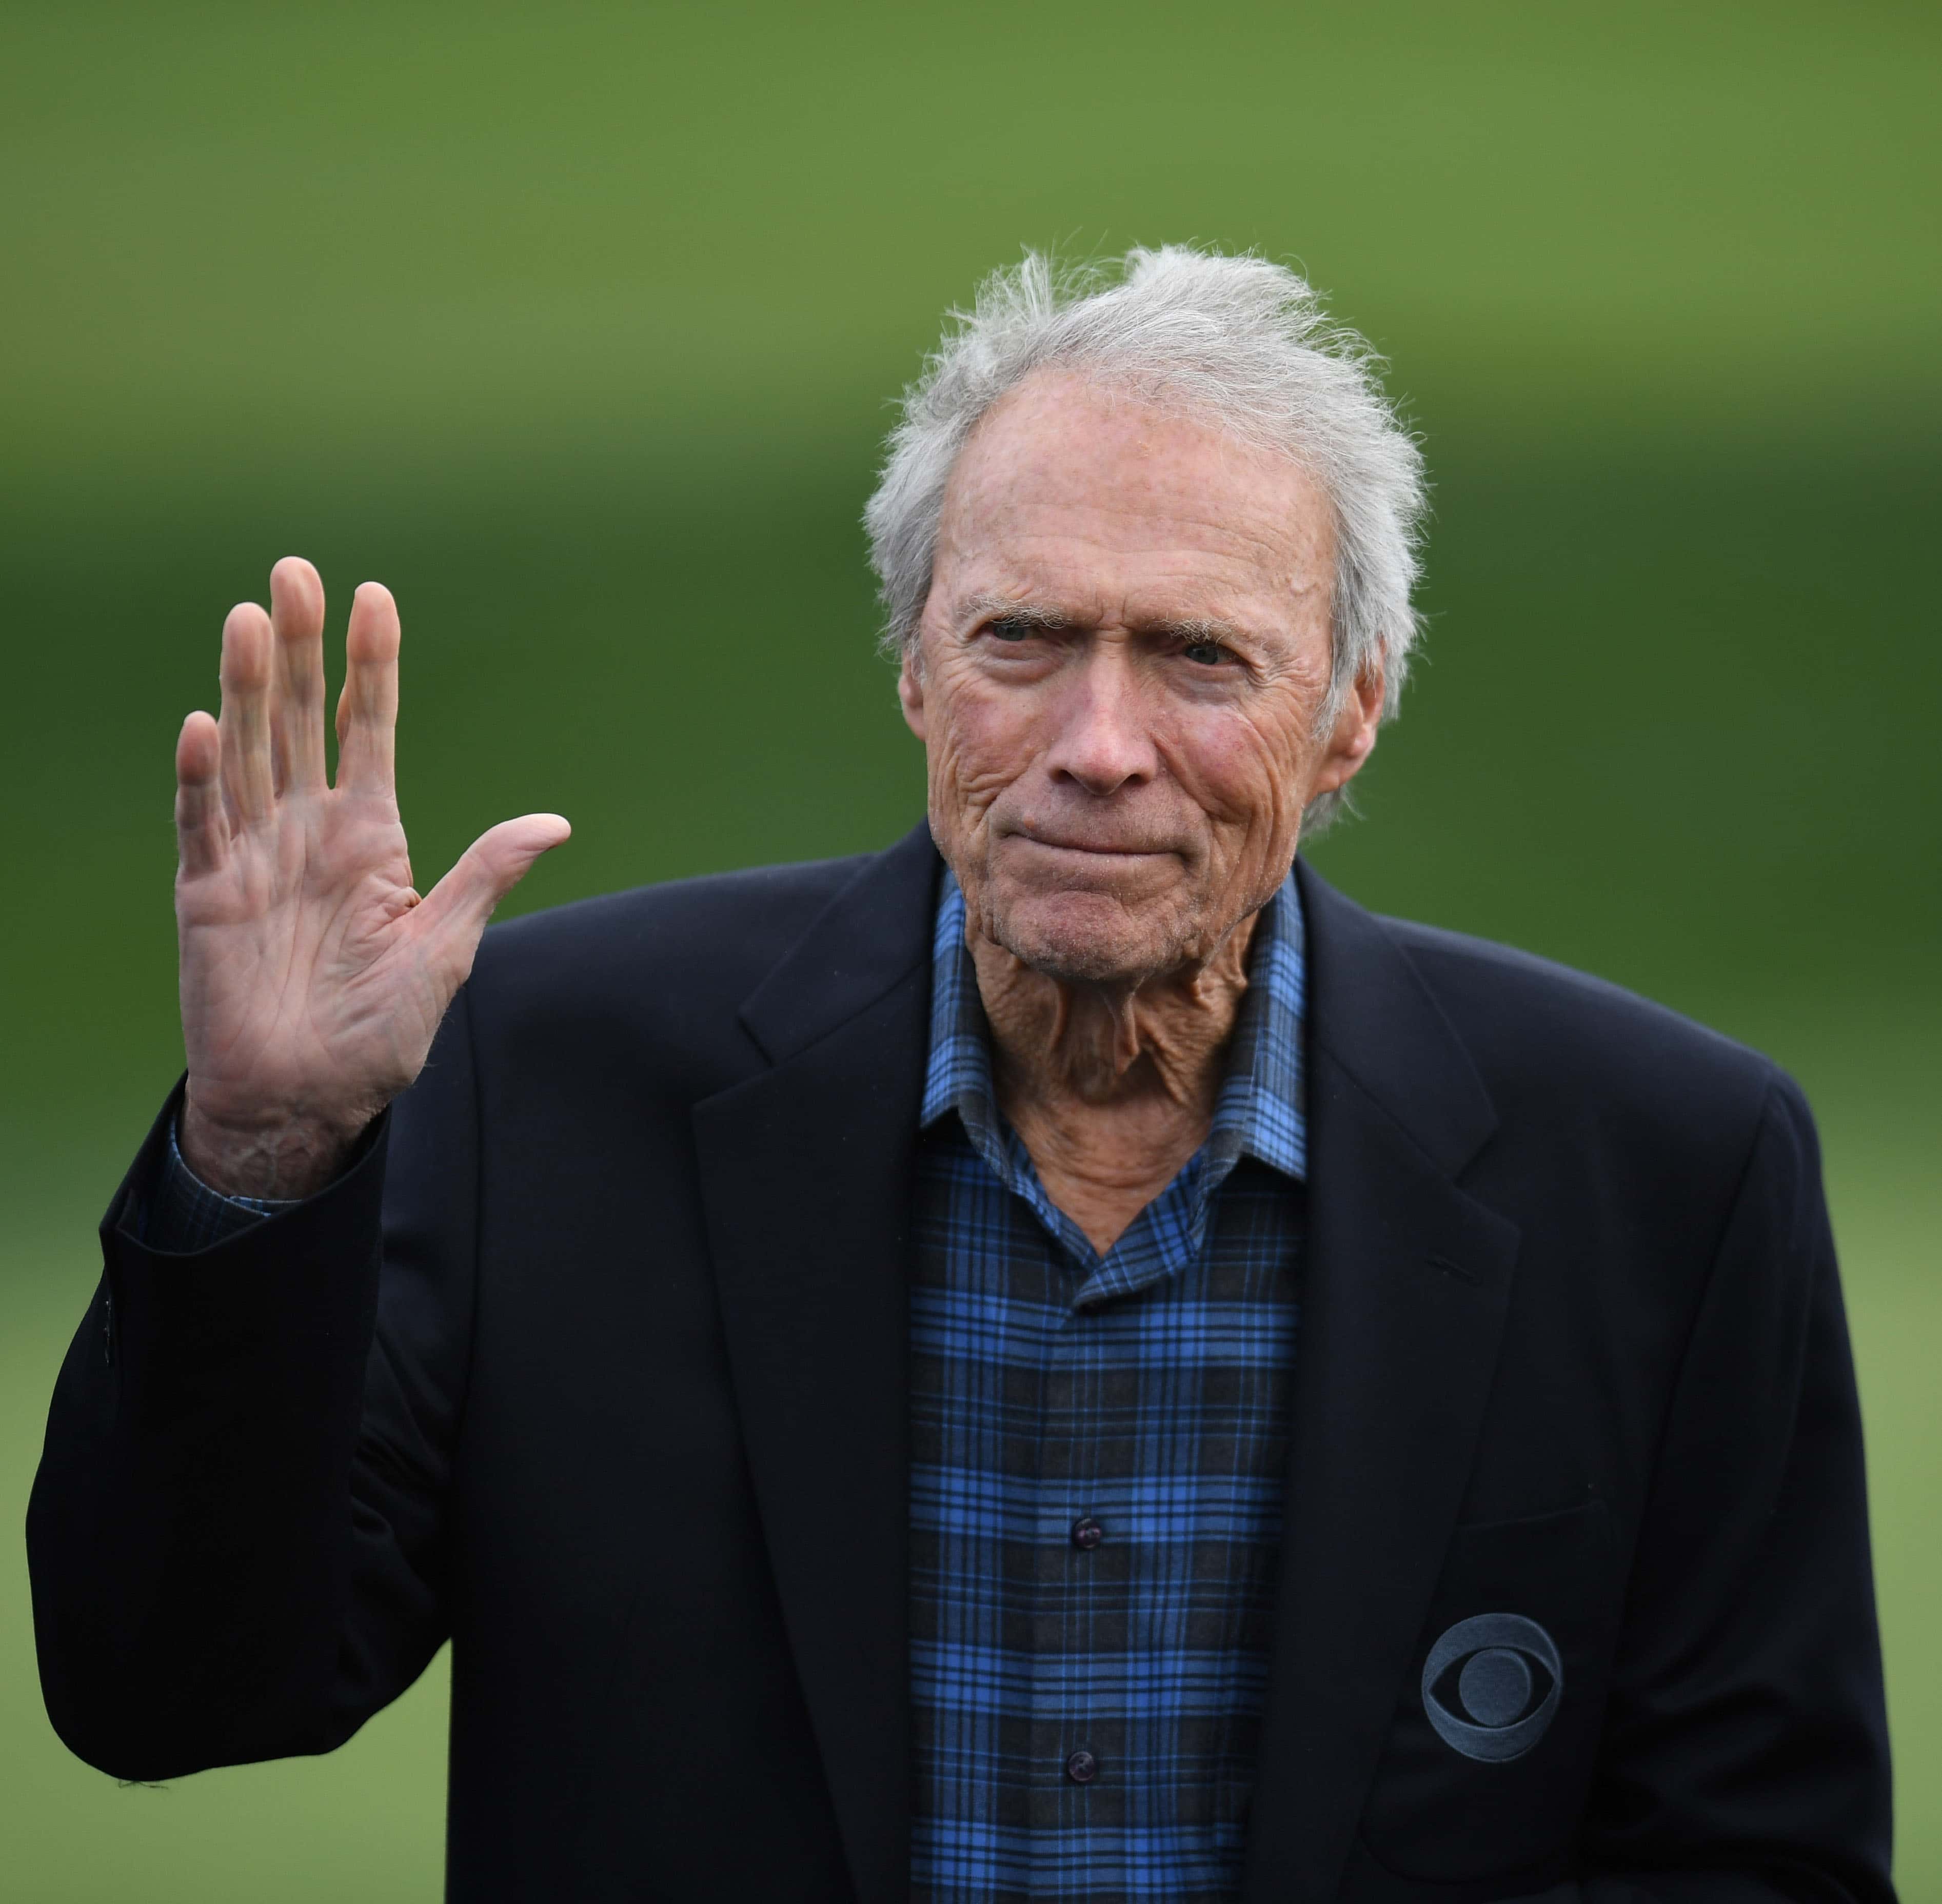 Clint Eastwood - Clint Eastwood Not Endorsing Donald Trump for 2020 ... : Clint eastwood learned how to make clint movies so that he could control every aspect of his career, including whom he worked with.